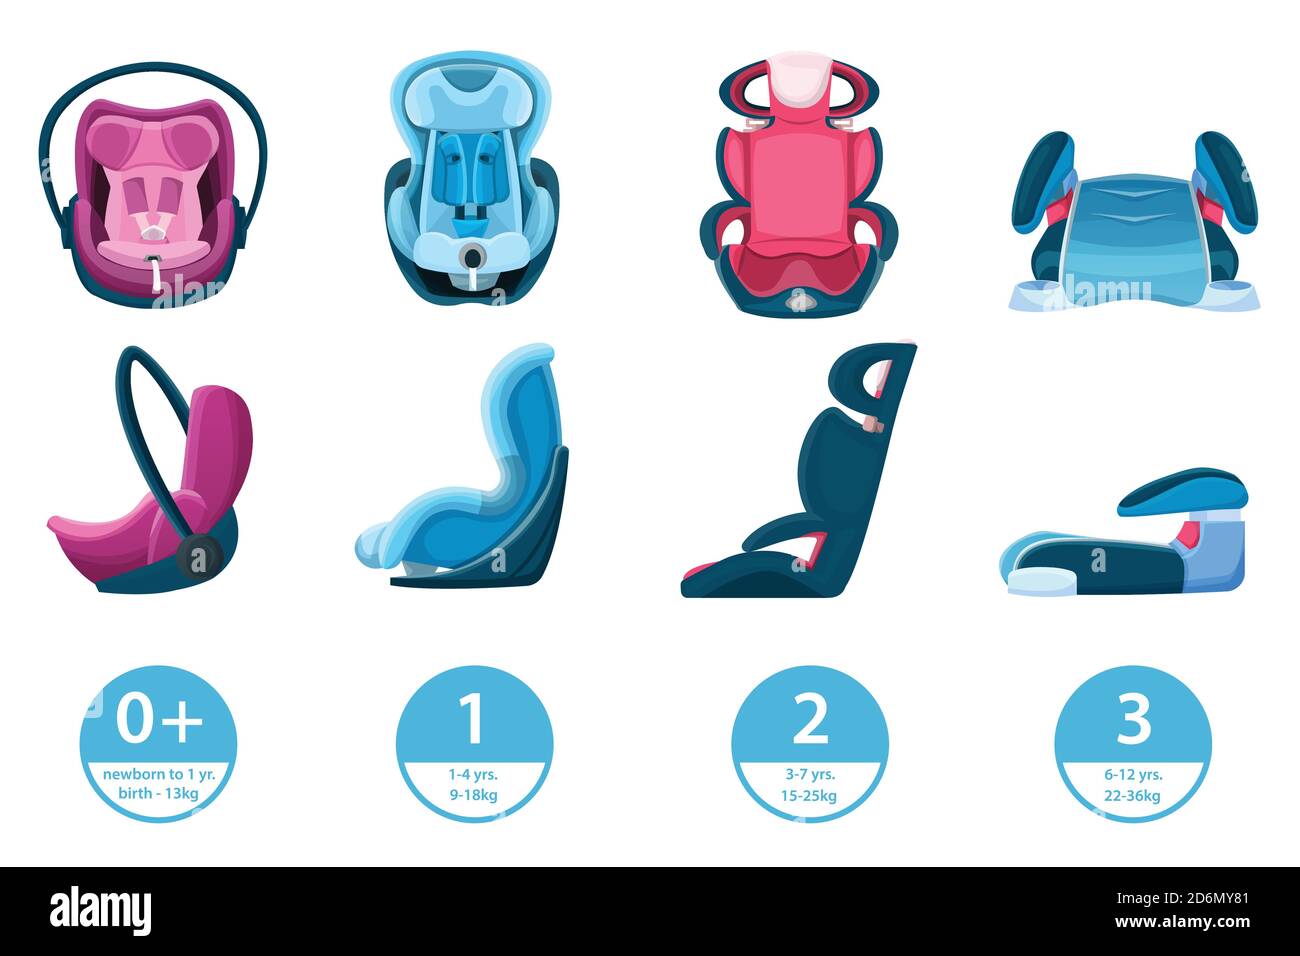 Child, infant and newborn baby car seats. Vector isolated cartoon icons. Safety automobile travel concept. Stock Vector